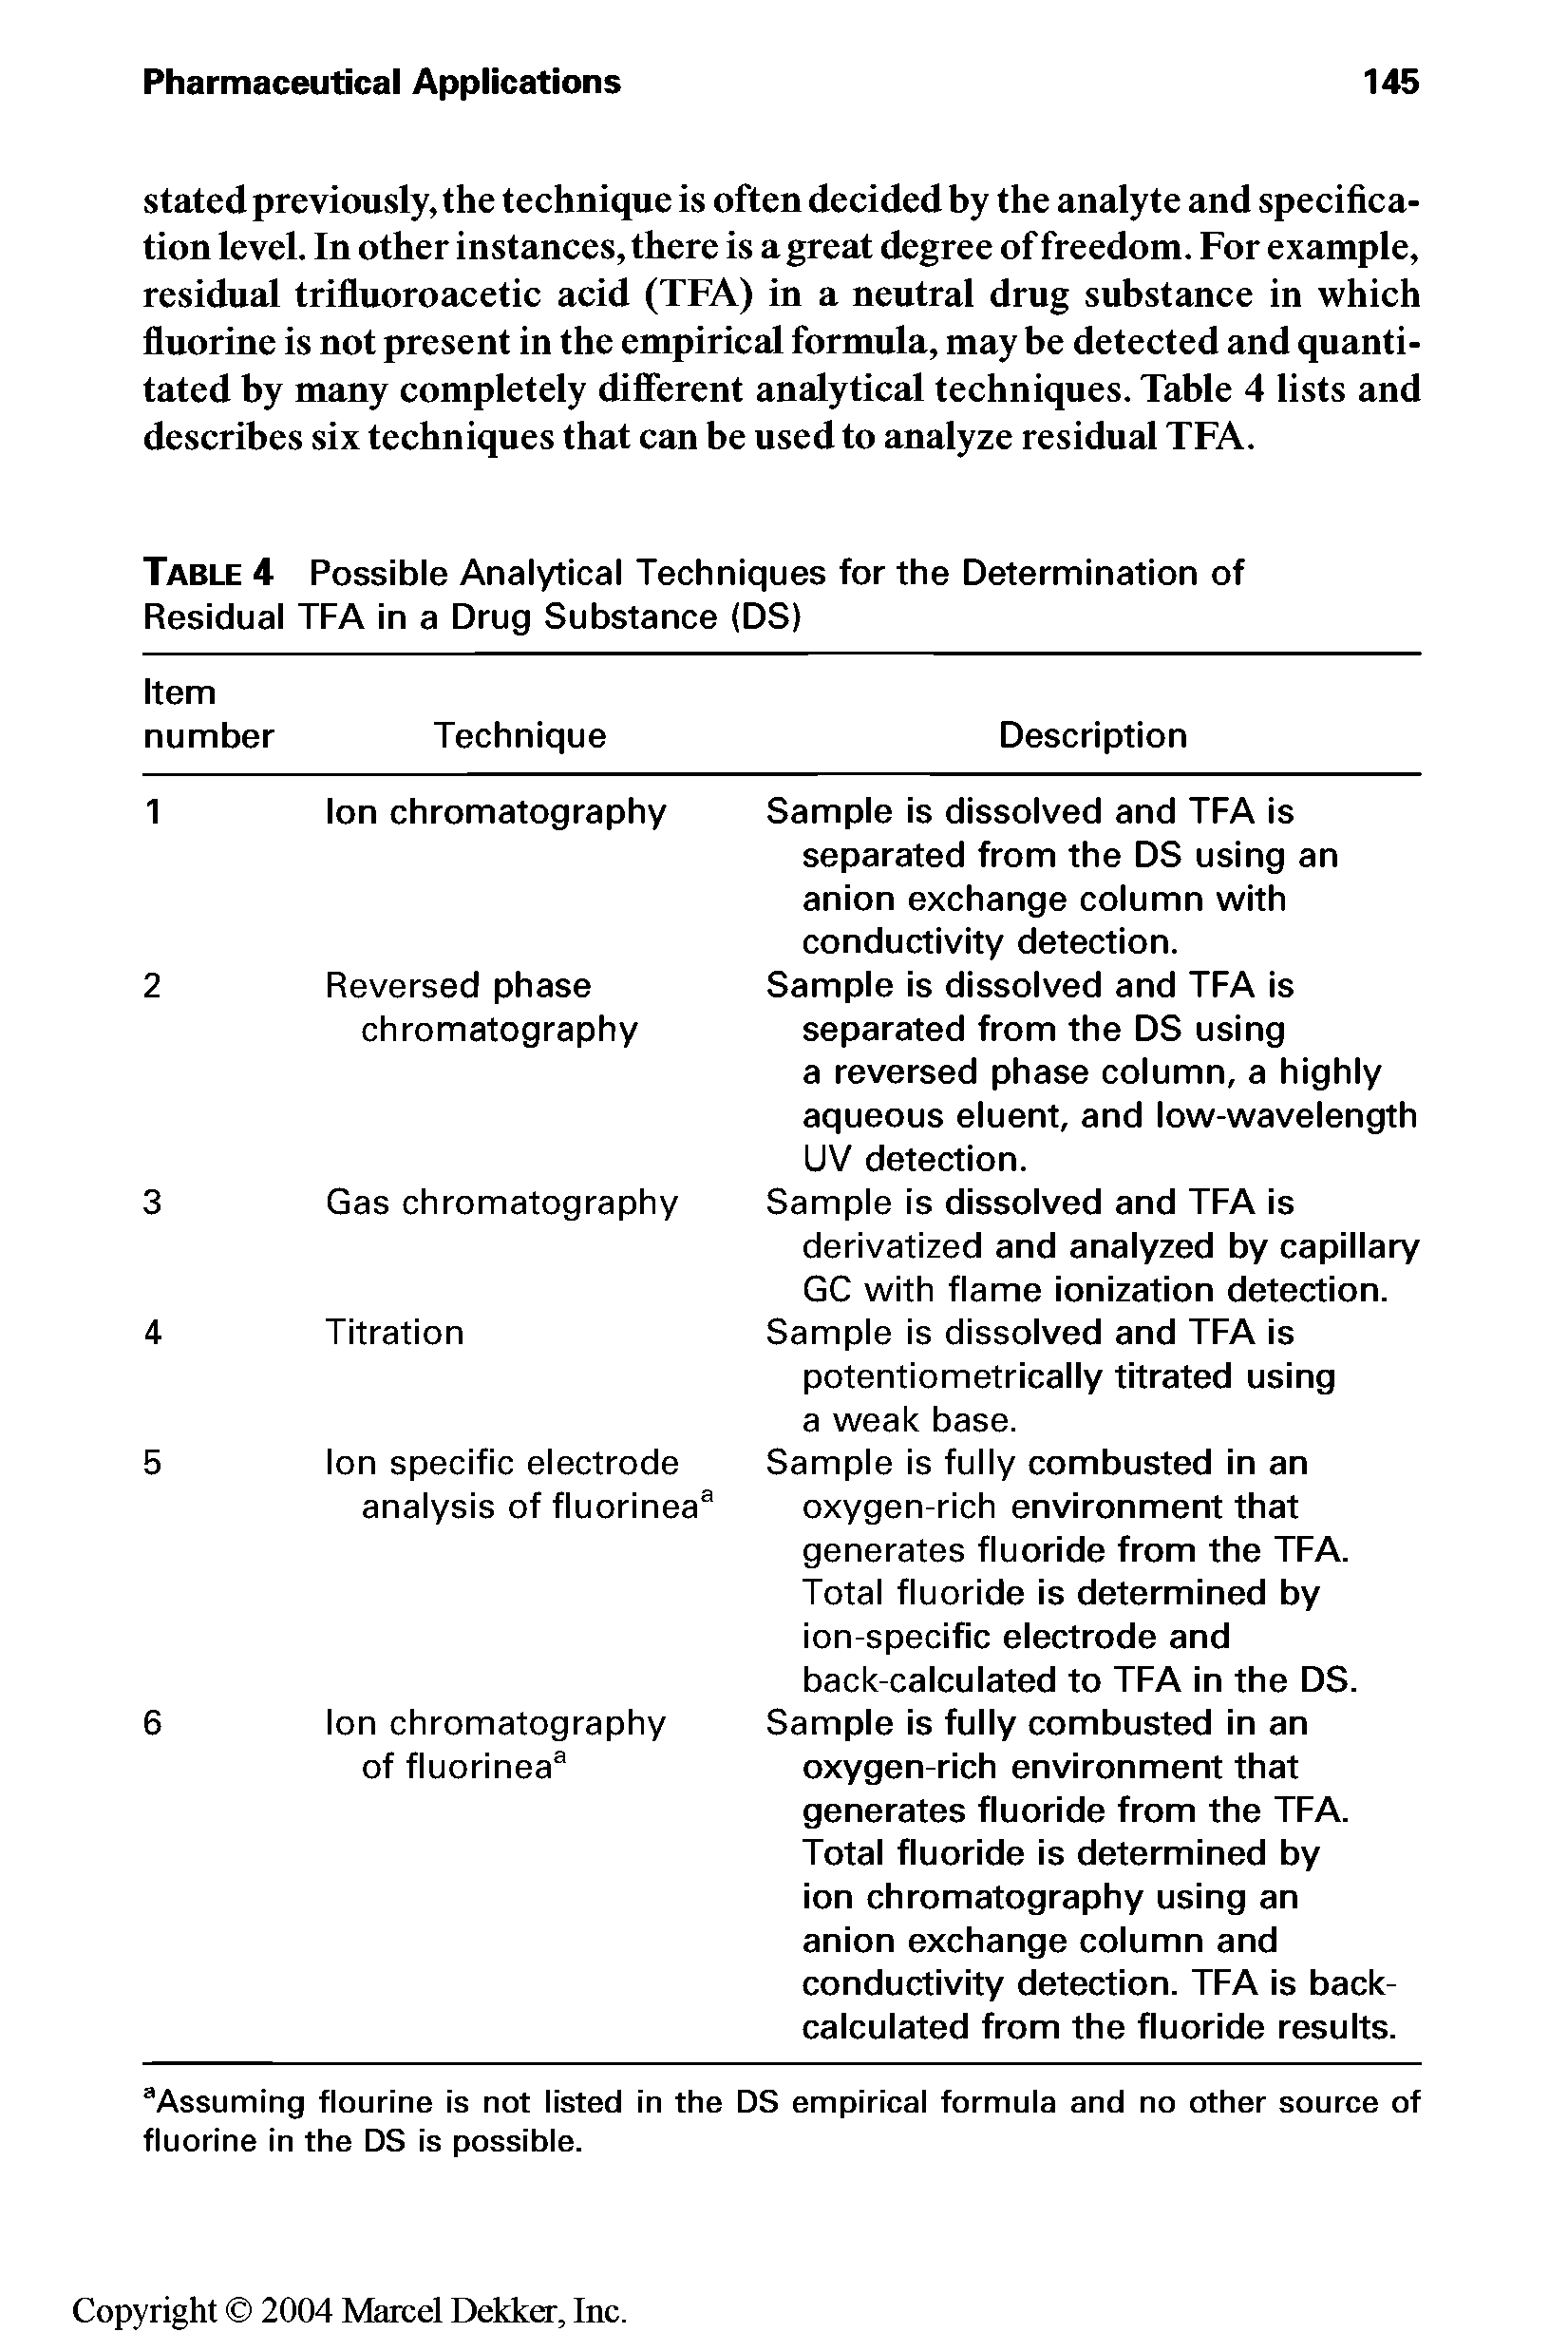 Table 4 Possible Analytical Techniques for the Determination of Residual TFA in a Drug Substance (DS)...